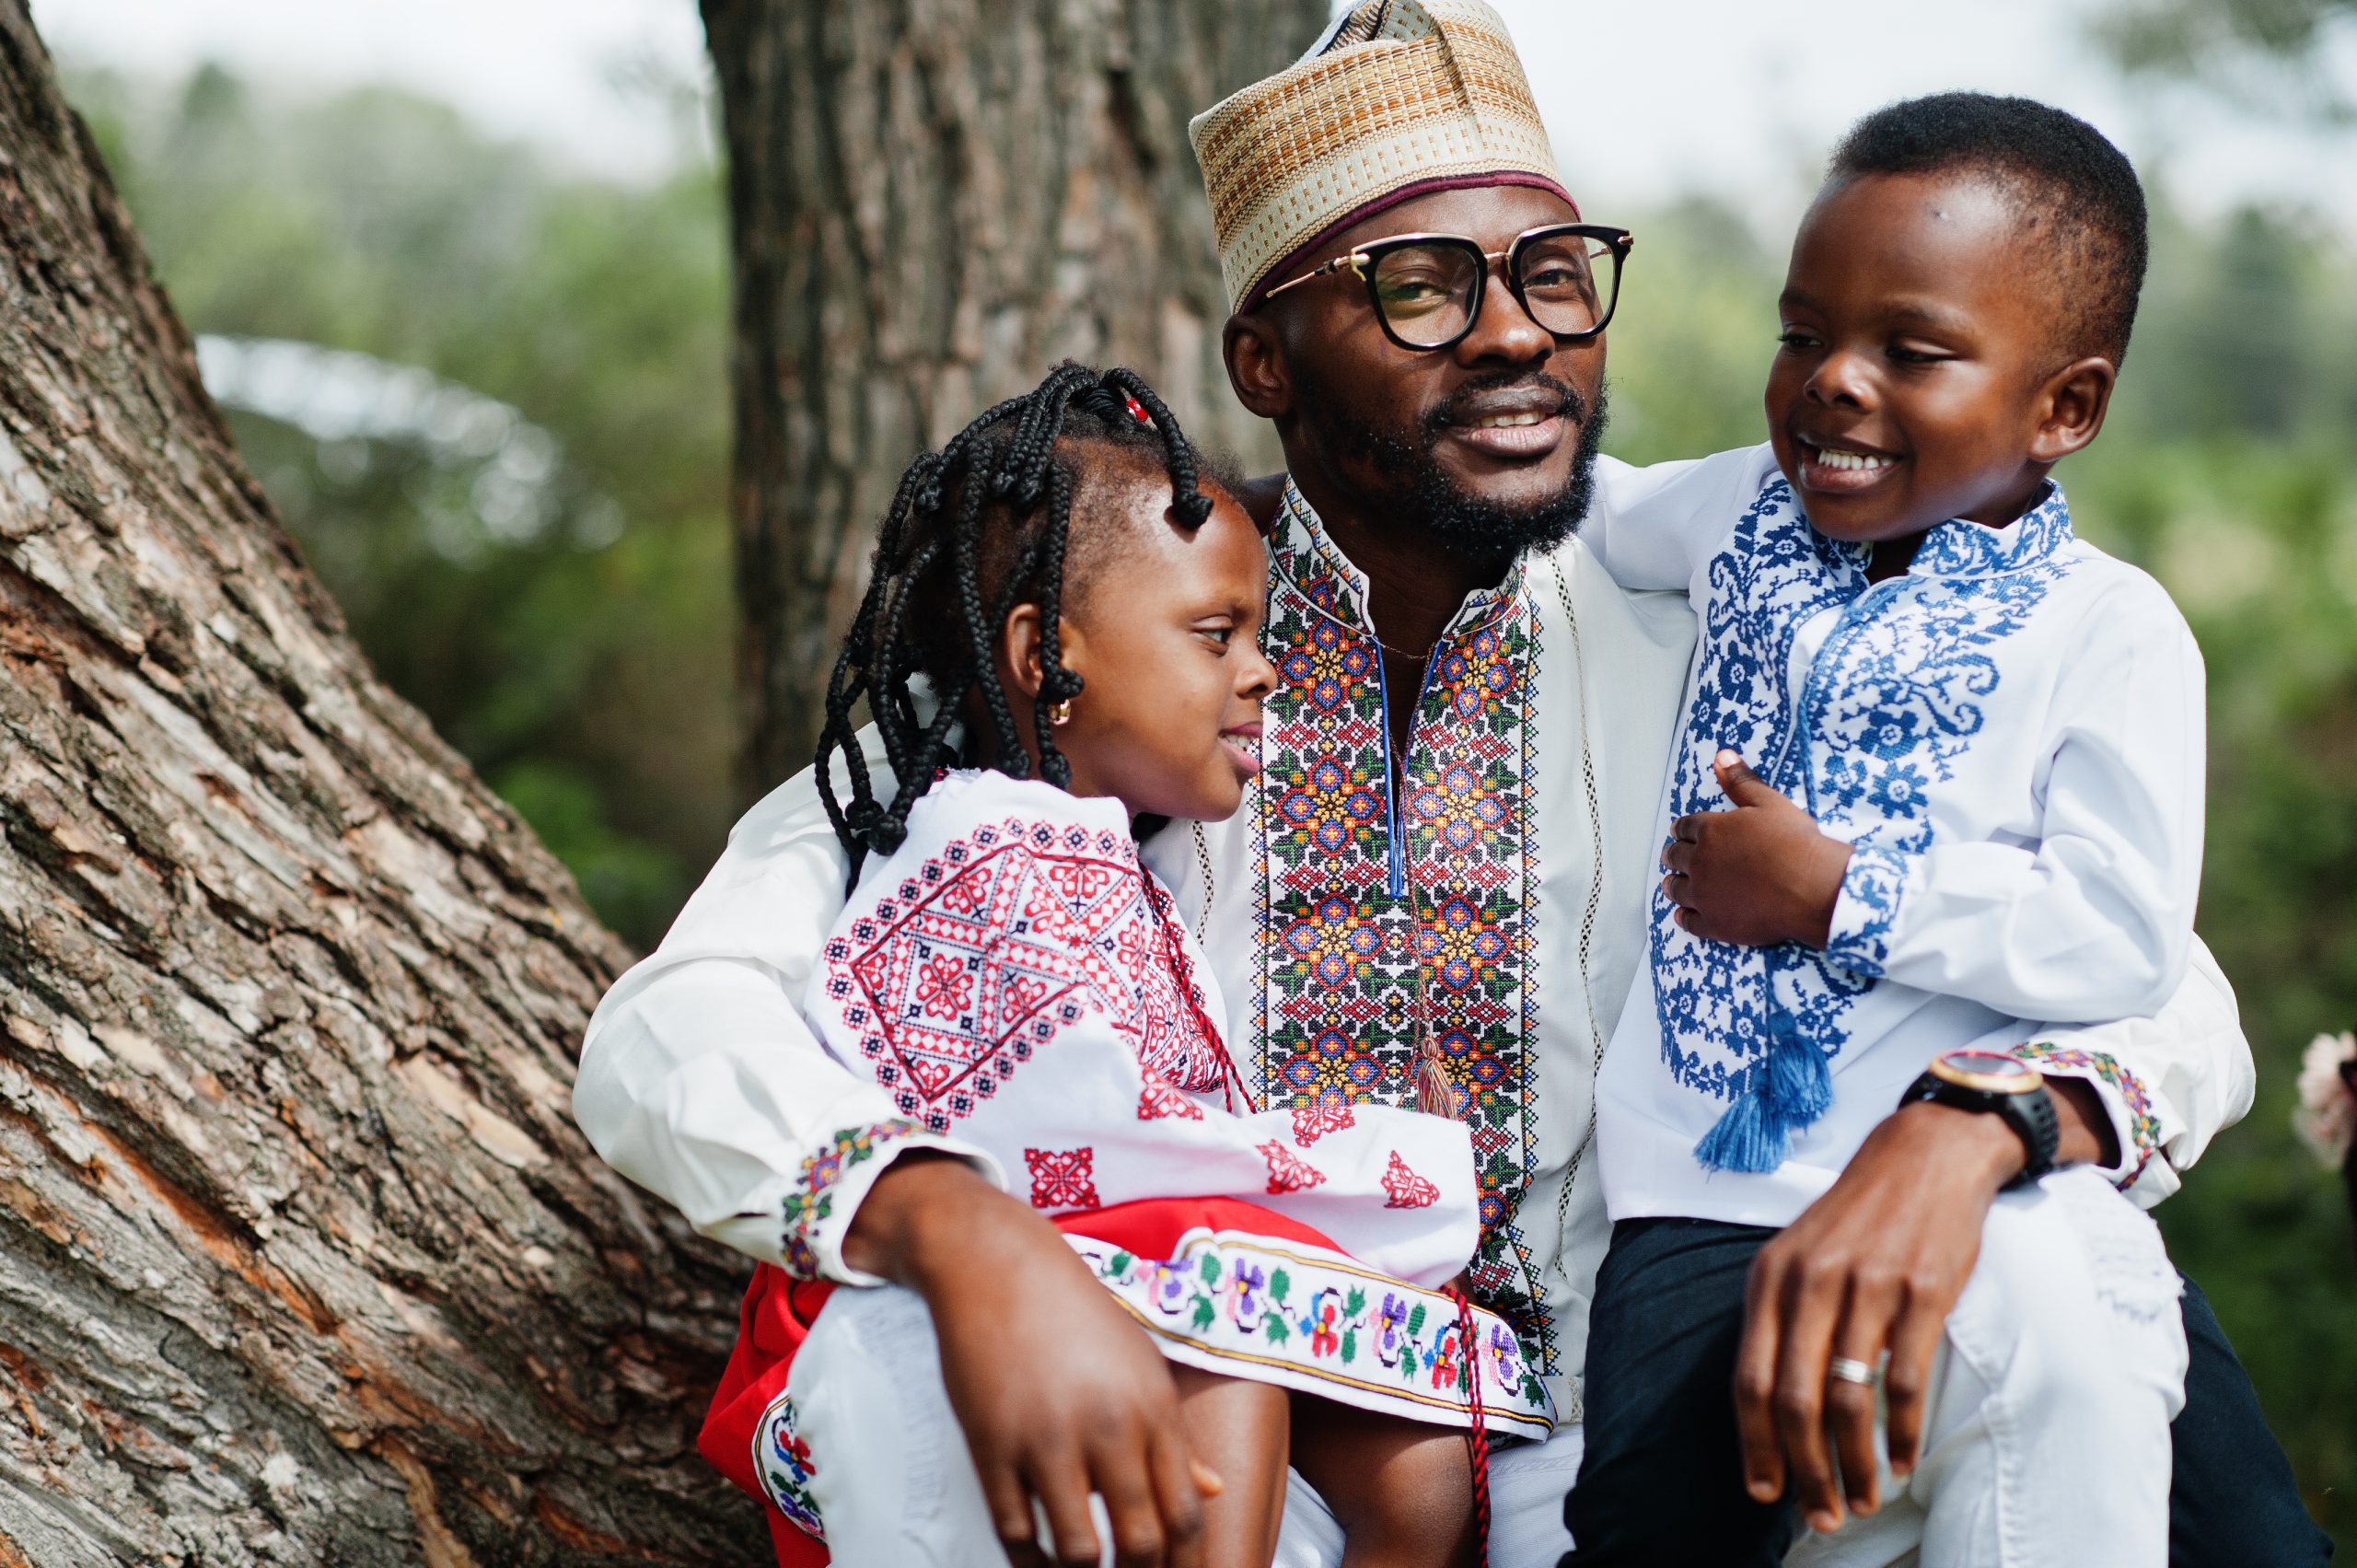 African father with kids in traditional clothes at park.